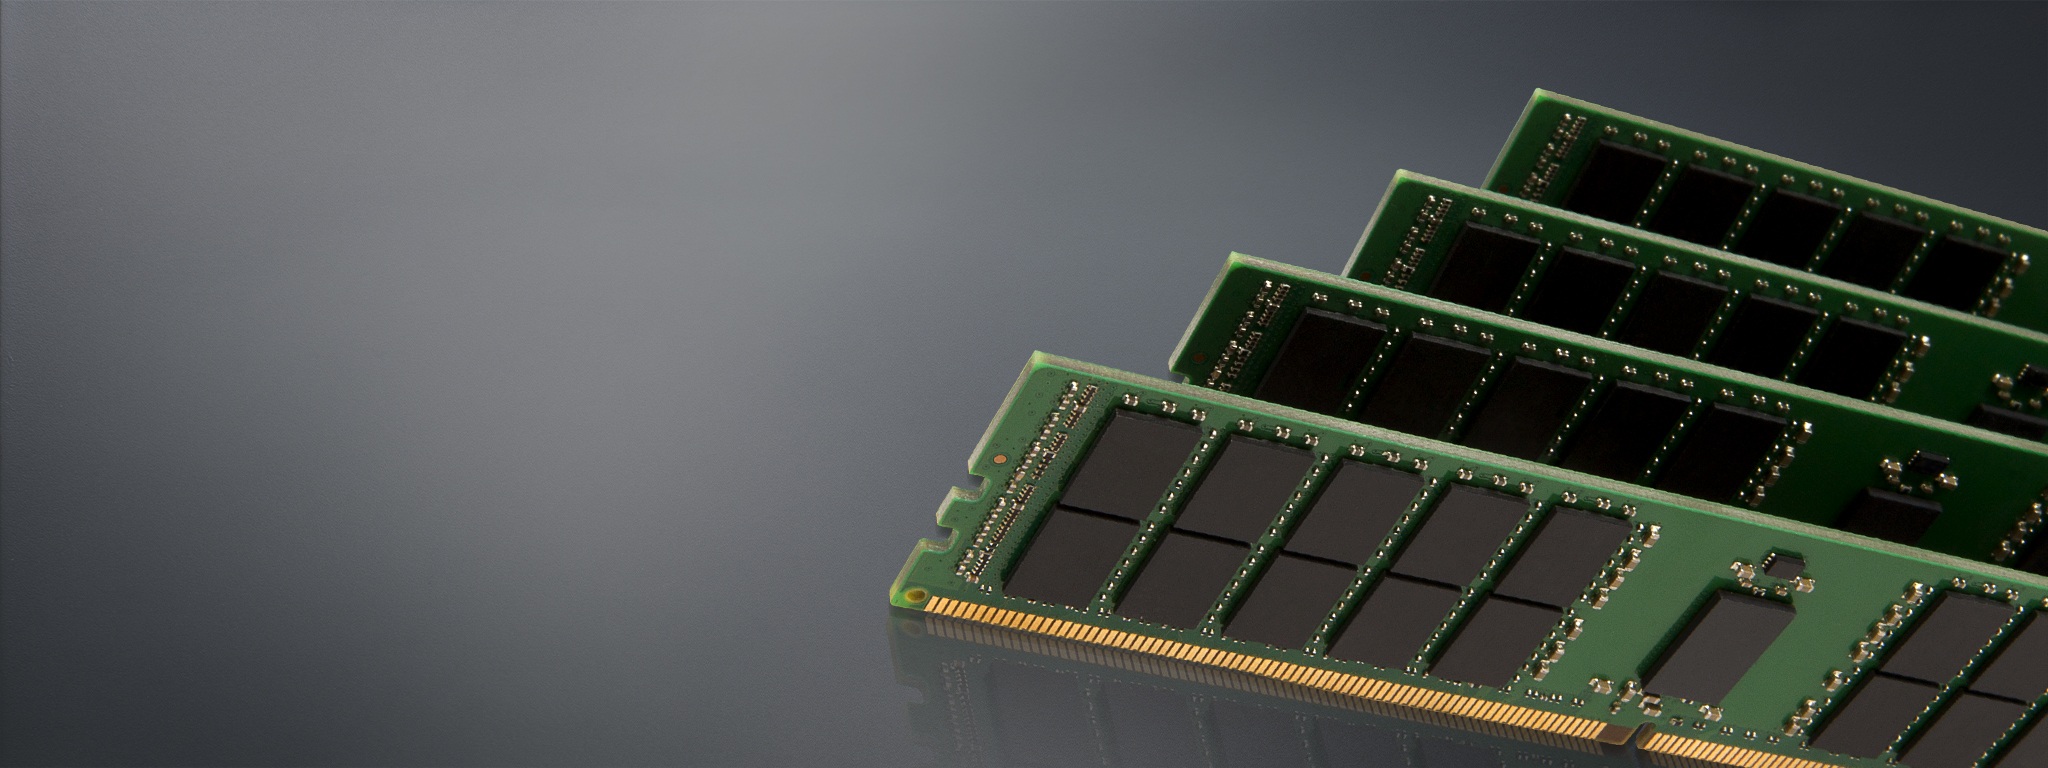 Kingston memory modules on a grey background with a reflection beneath it